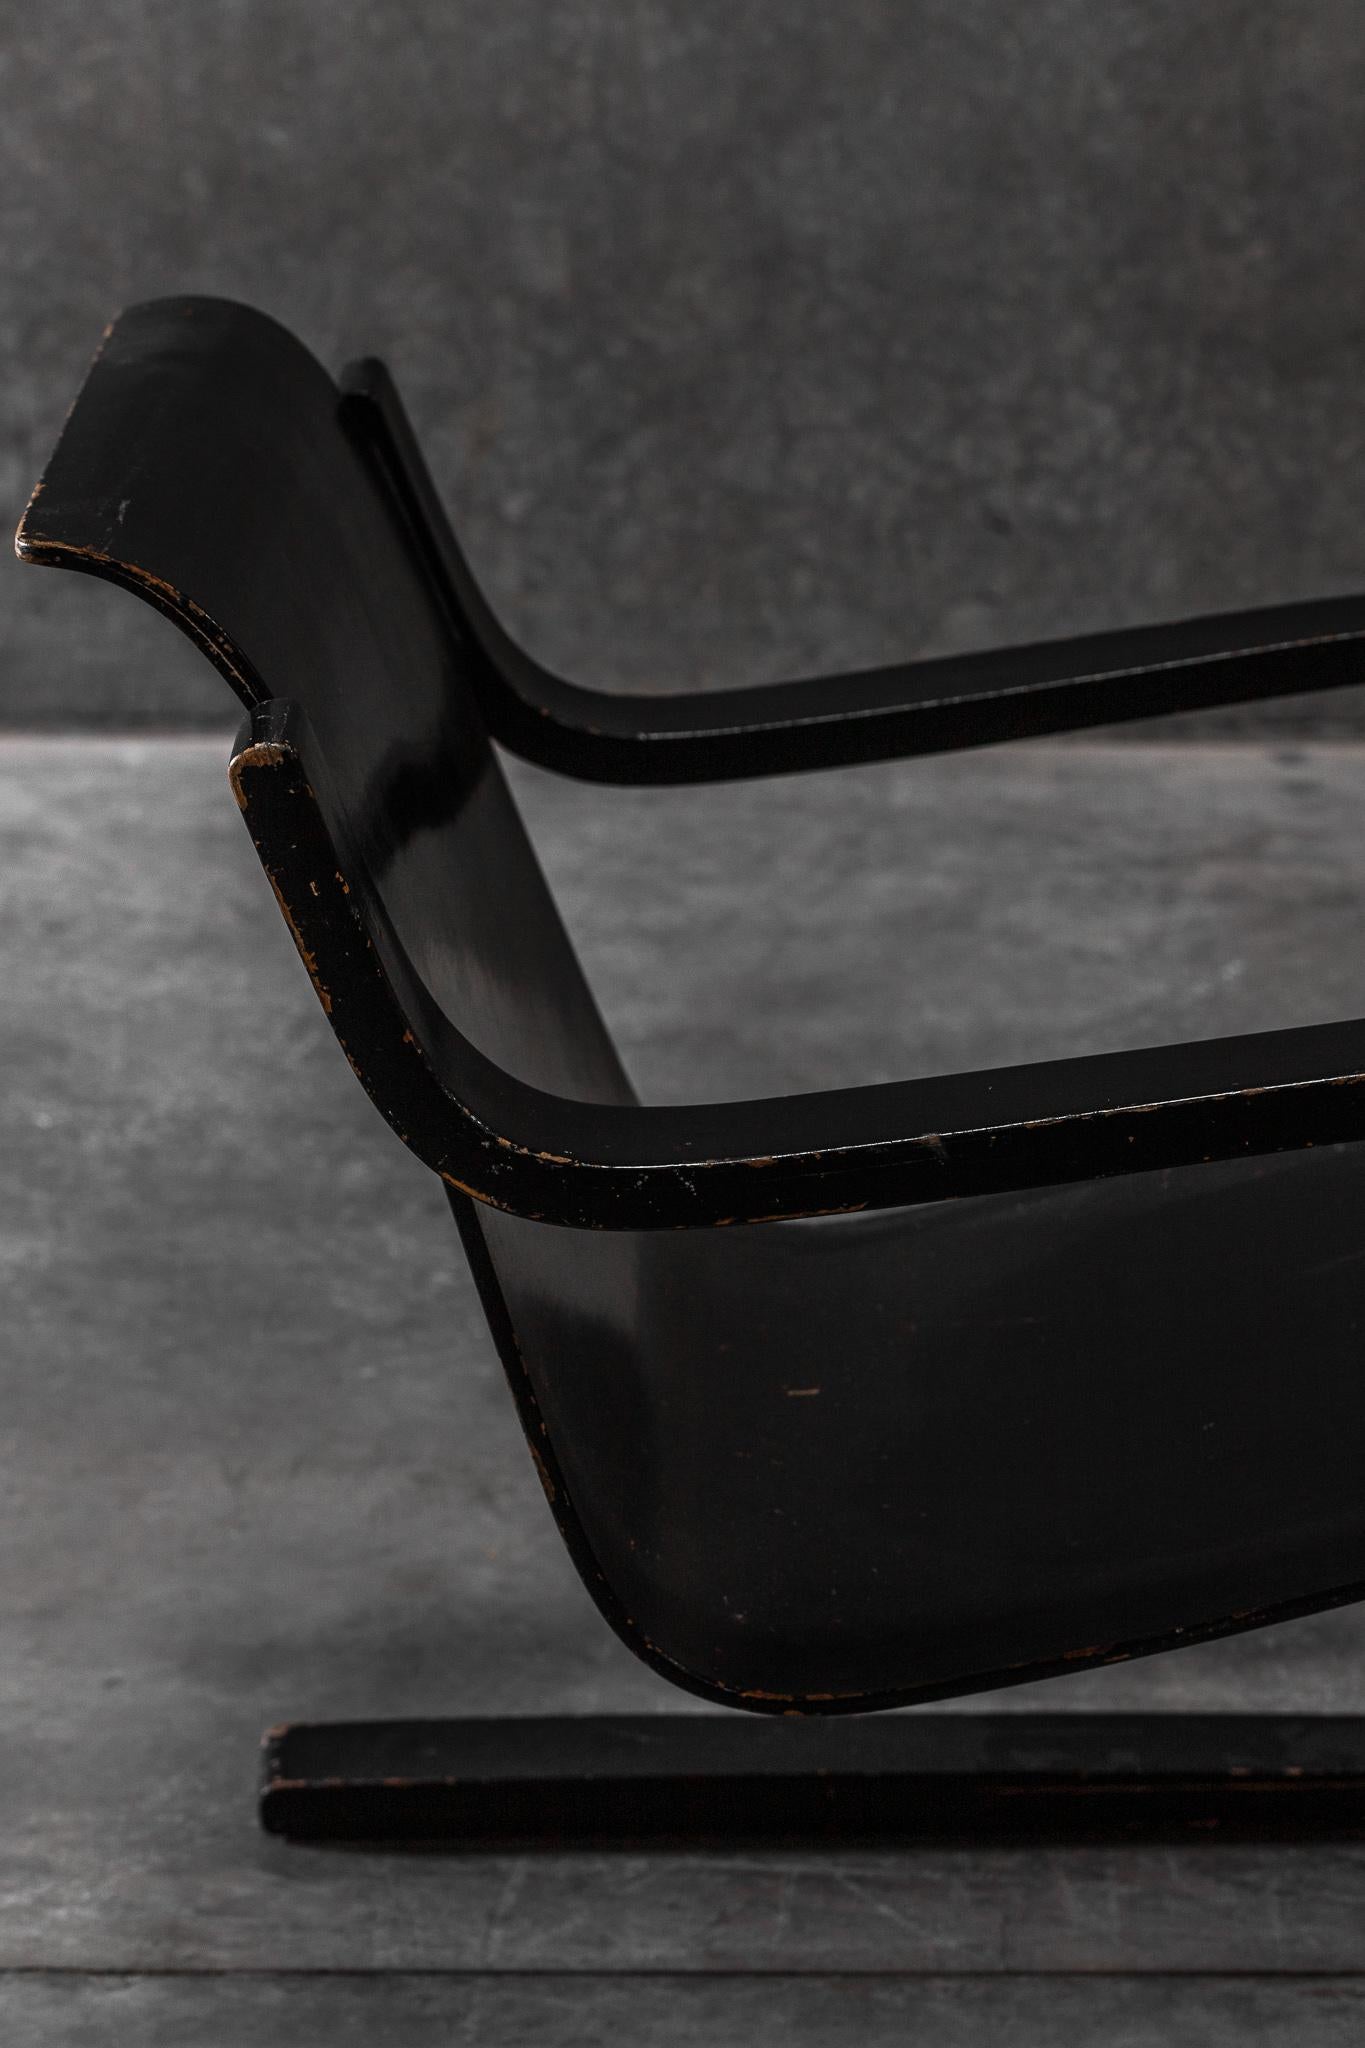  Cantilevered Lounge Chair by Alvar Aalto In Fair Condition For Sale In Los Angeles, CA